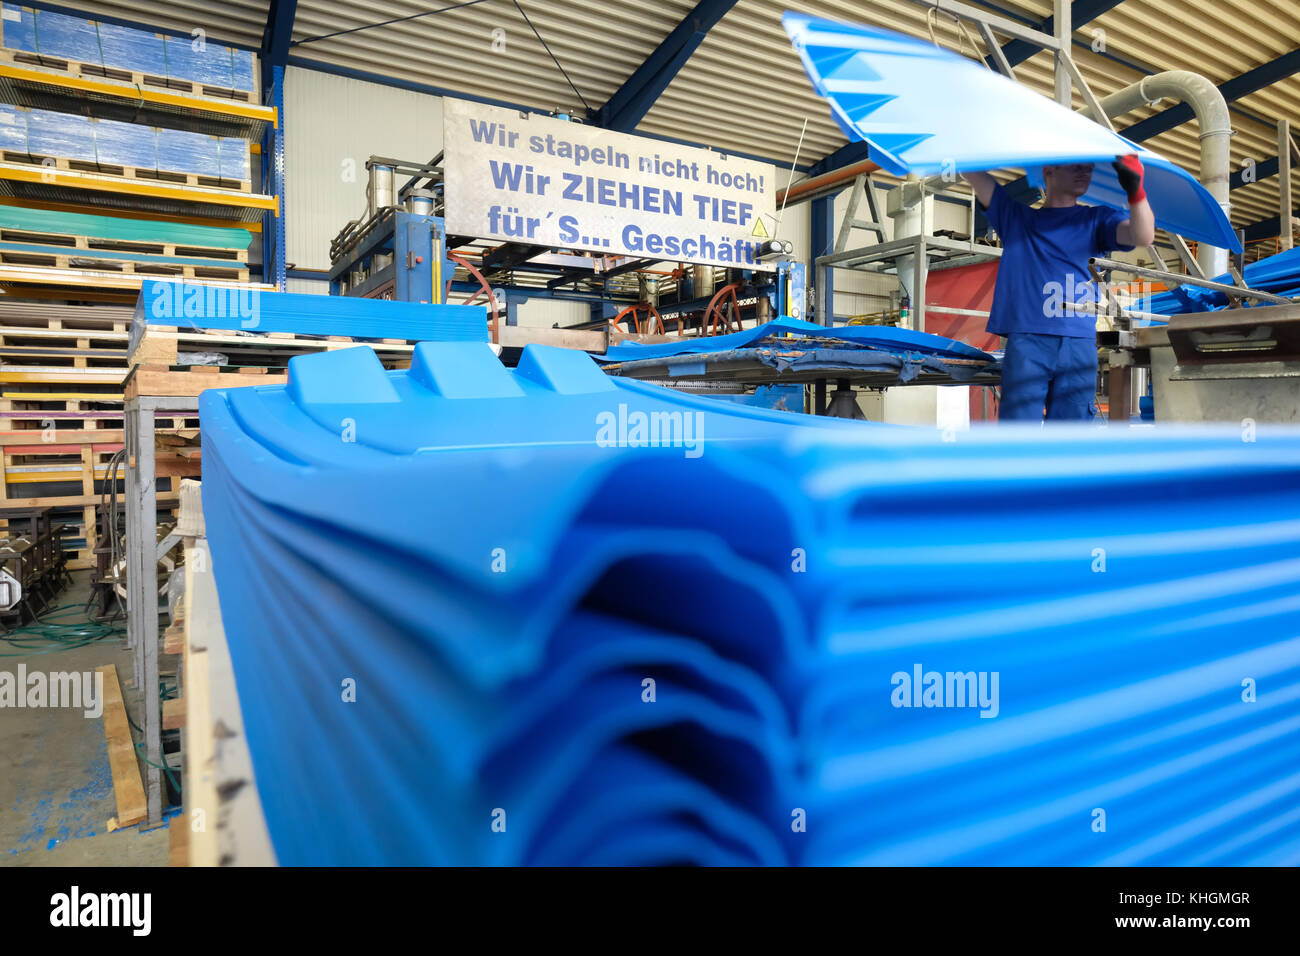 Coswig, Germany. 16th Nov, 2017. An employee of the Global Fliegenschmidt GmbH can be seen carrying the side of a rental toilet in Coswig, Germany, 16 November 2017. The company specialized in manufacturing mobile toilets and sanitary wagons. Credit: Sebastian Willnow/dpa-Zentralbild/dpa/Alamy Live News Stock Photo